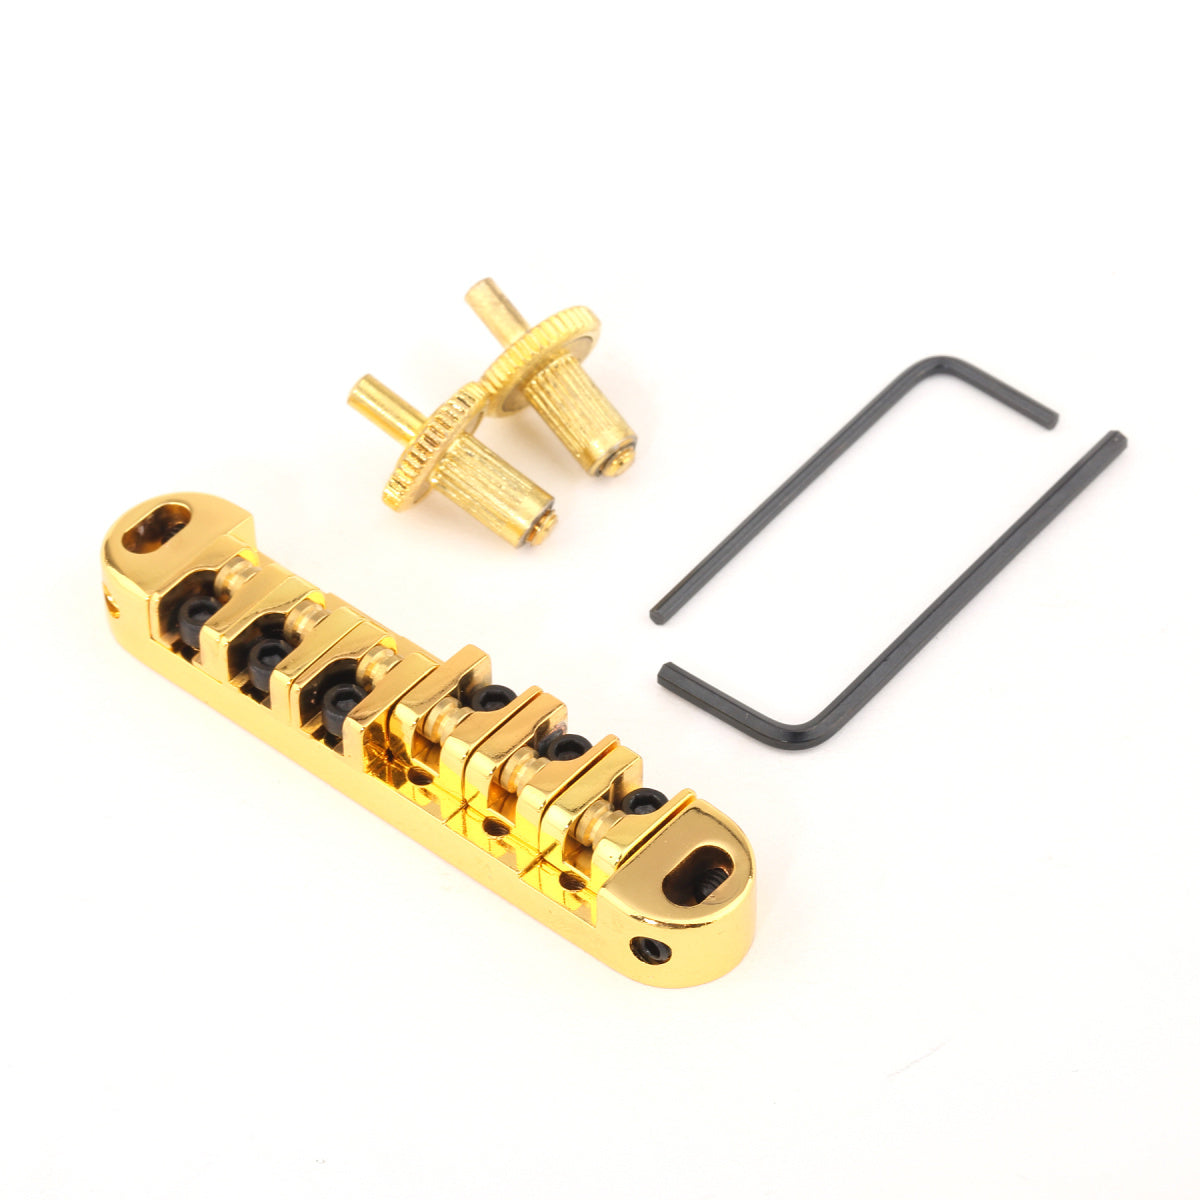 Musiclily Roller Locking Tune-o-matic Guitar Bridge Tunematic Saddle for Les Paul Style Electric Guitar,Gold